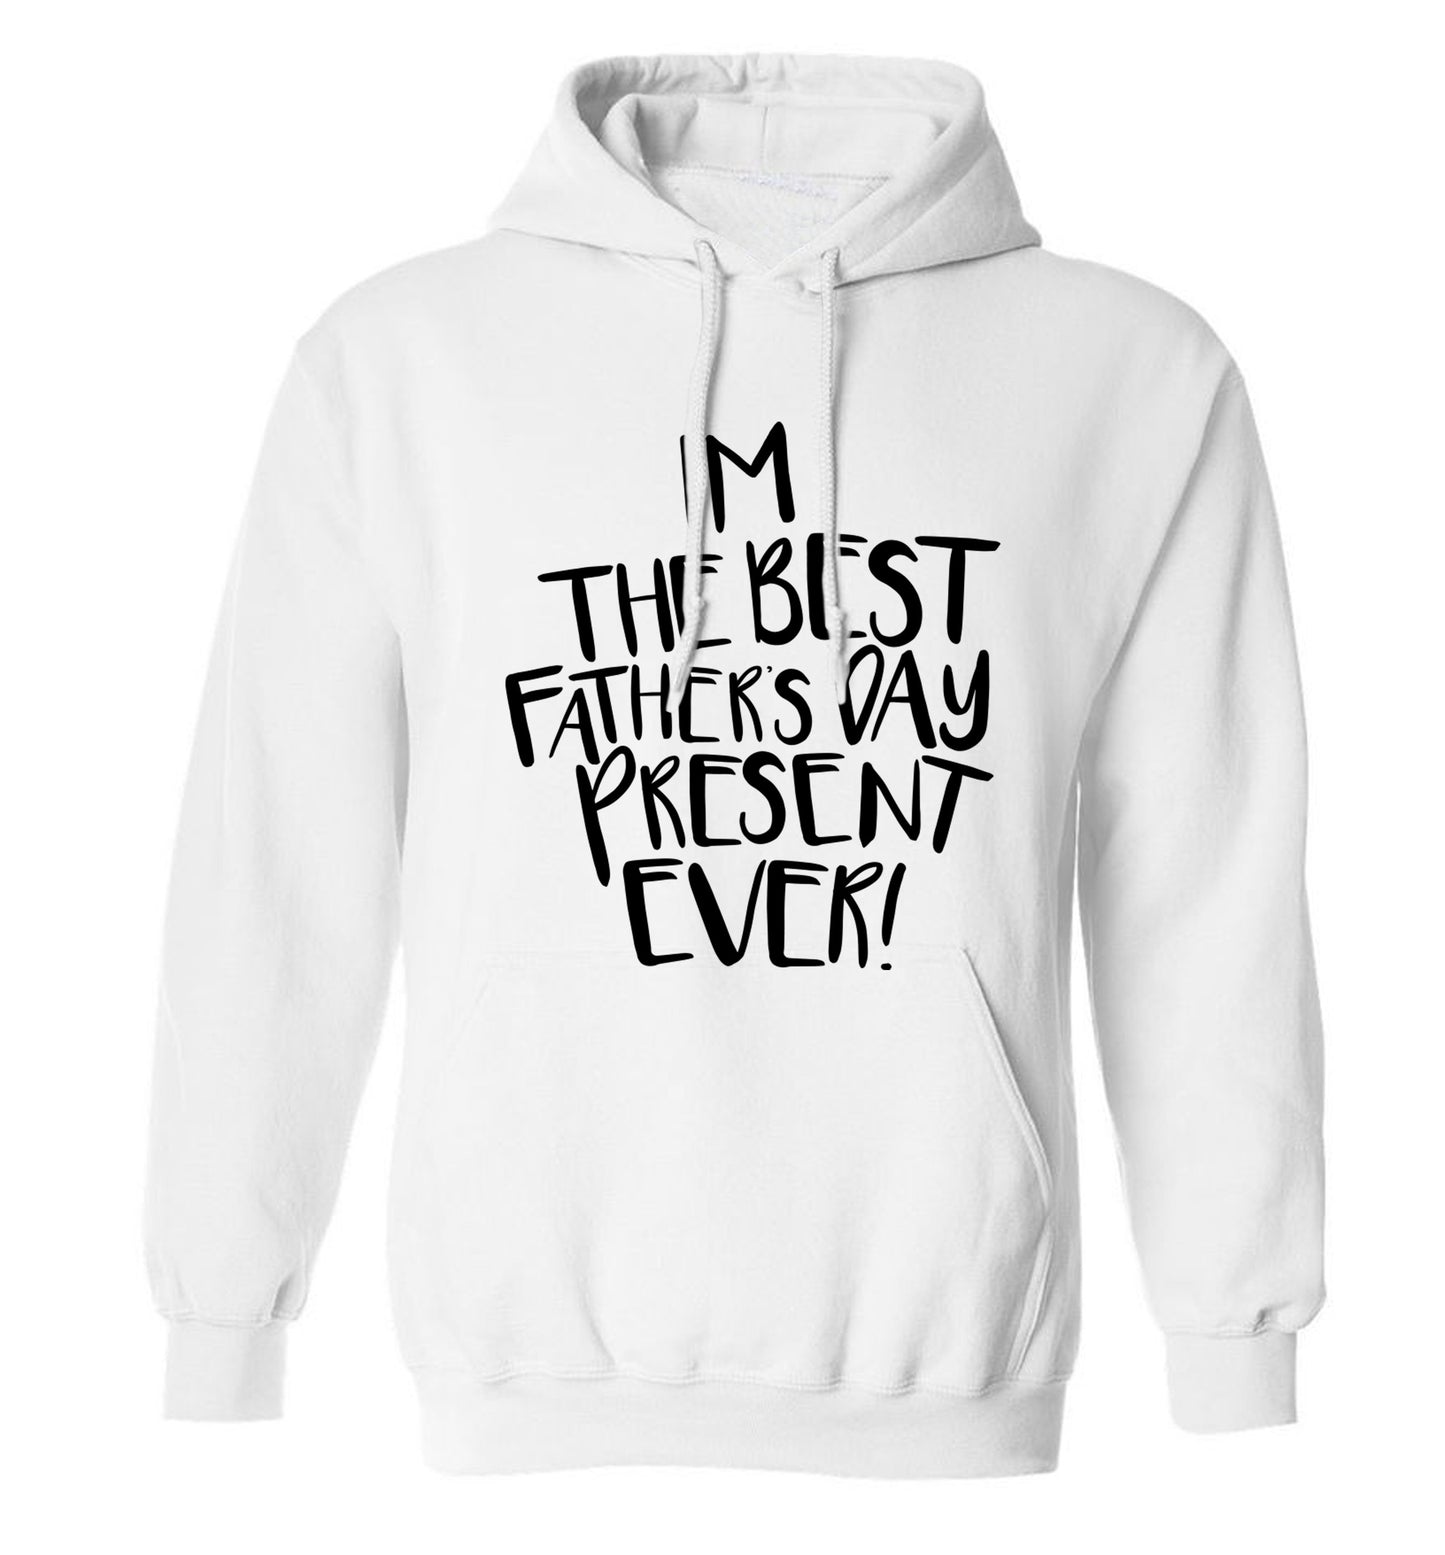 I'm the best father's day present ever! adults unisex white hoodie 2XL